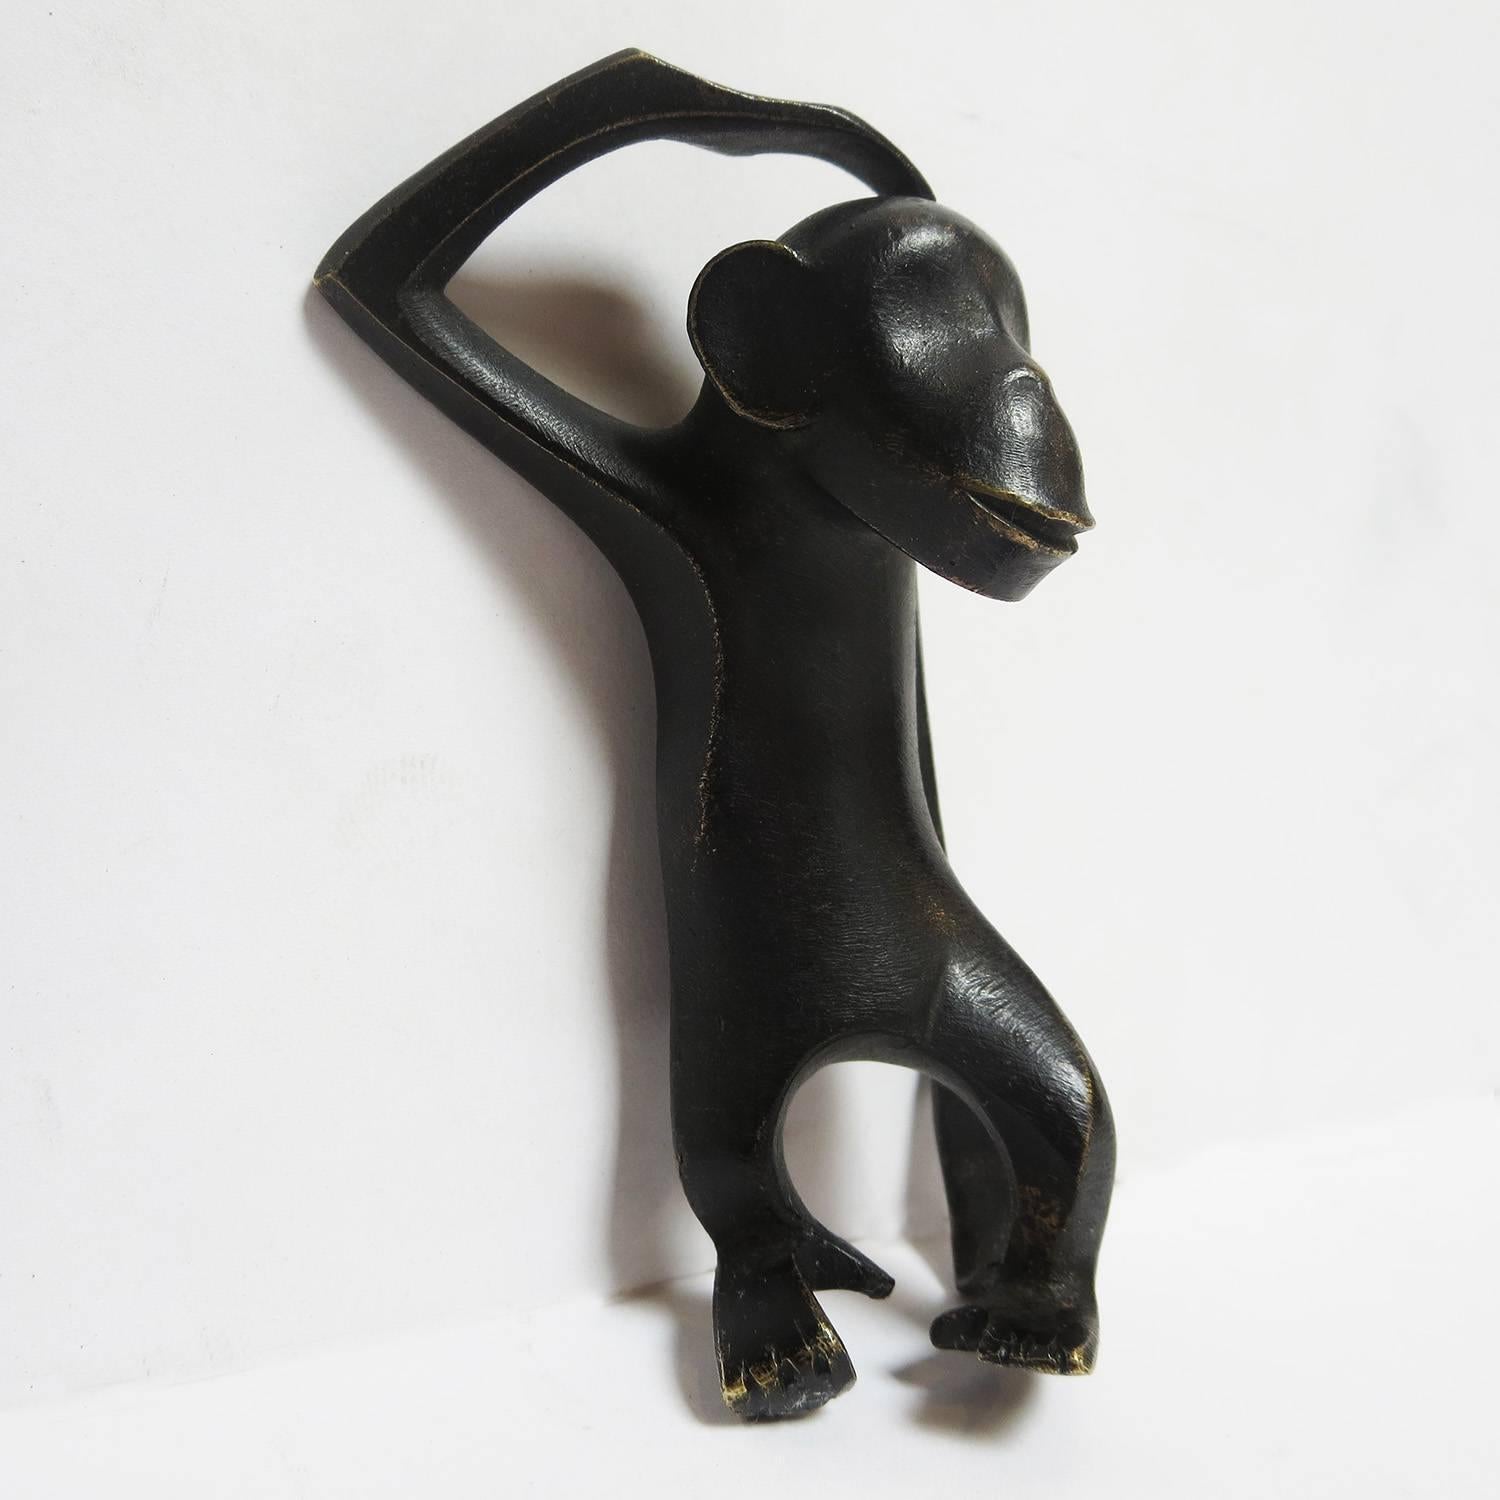 This charming monkey was made by the Hagenauer workshops in Vienna Austria in the 1930s. Karl Hagenauer was fascinated with the exotic images of African people and animals, and used them generously in his works. The monkey is in excellent original